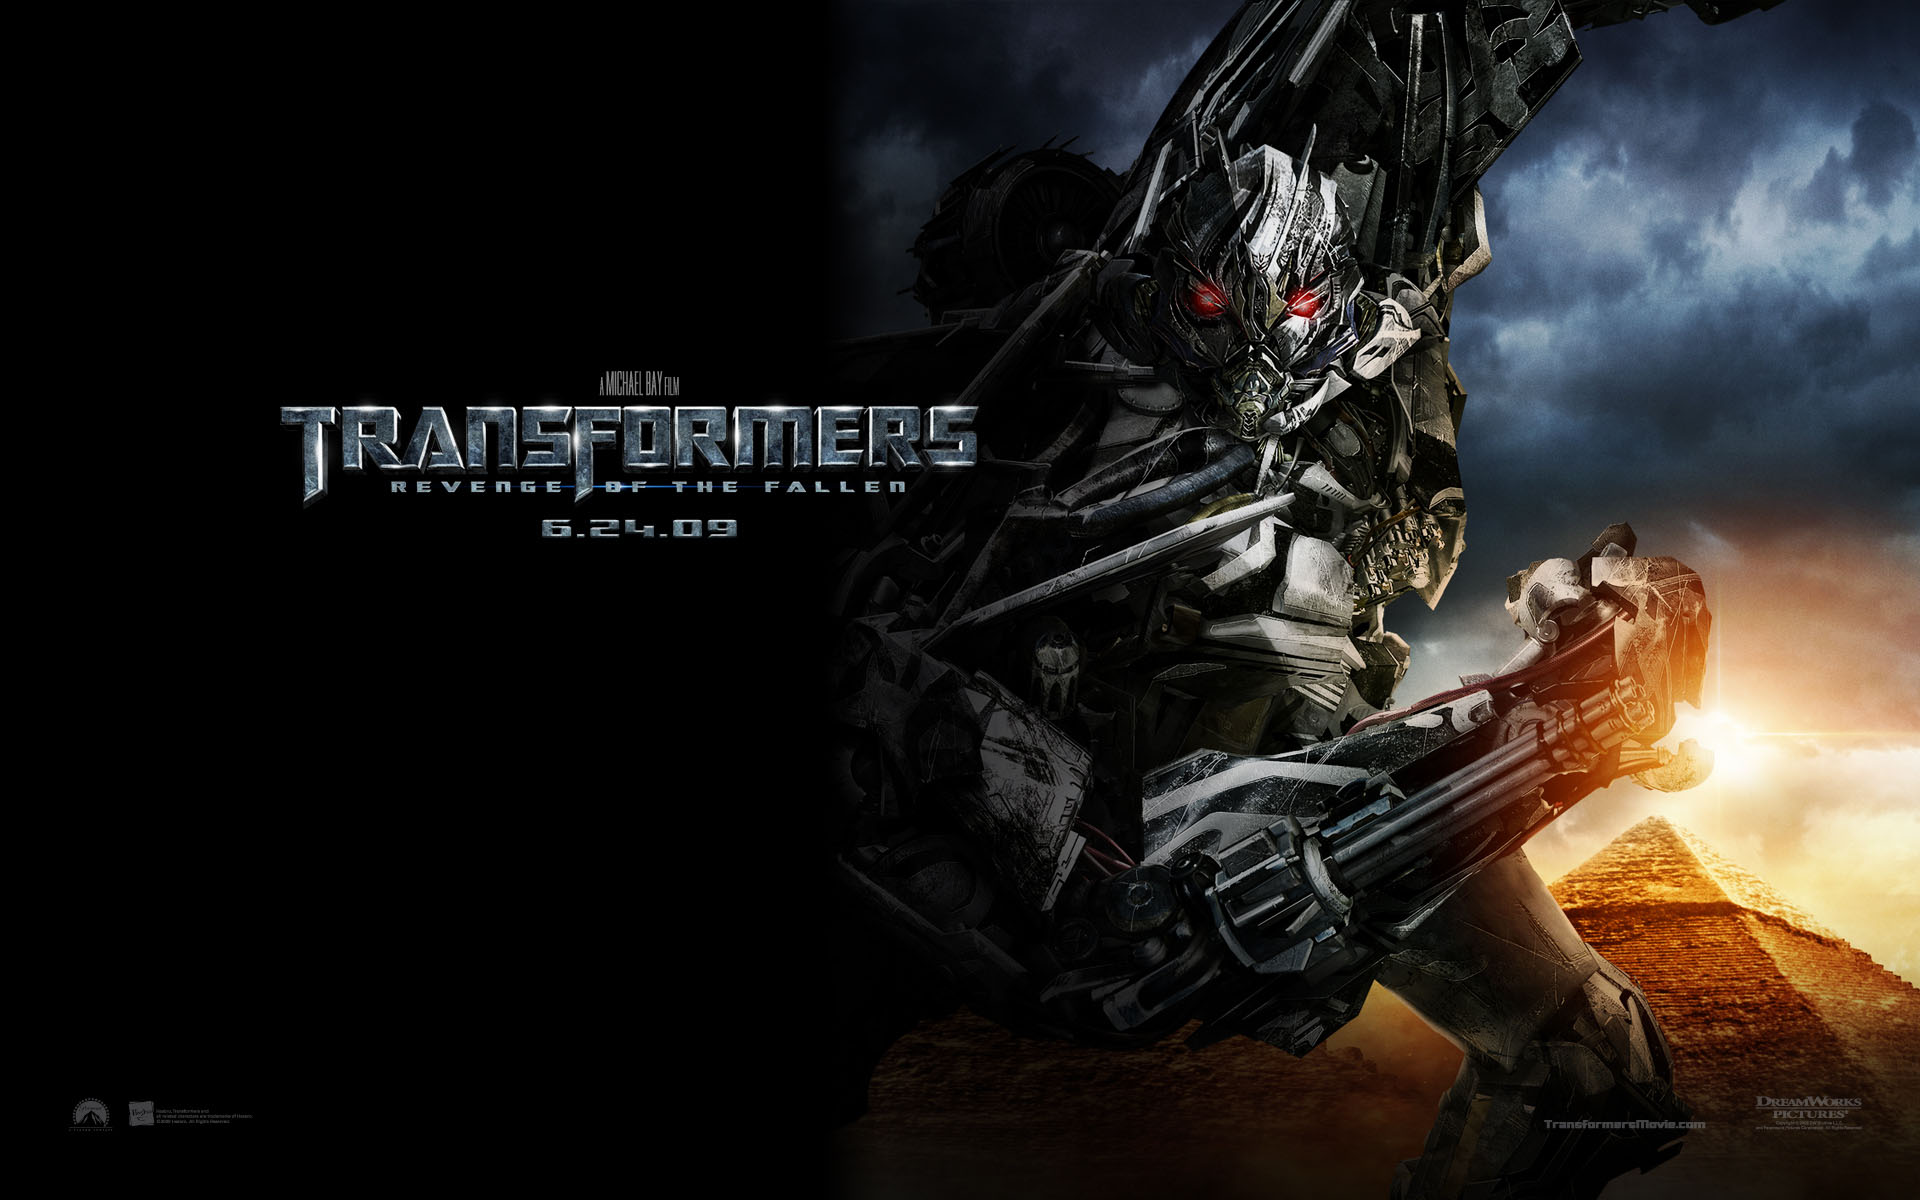 Previous, Movies - Films T - Transformers 2 Revenge of the Fallen wallpaper